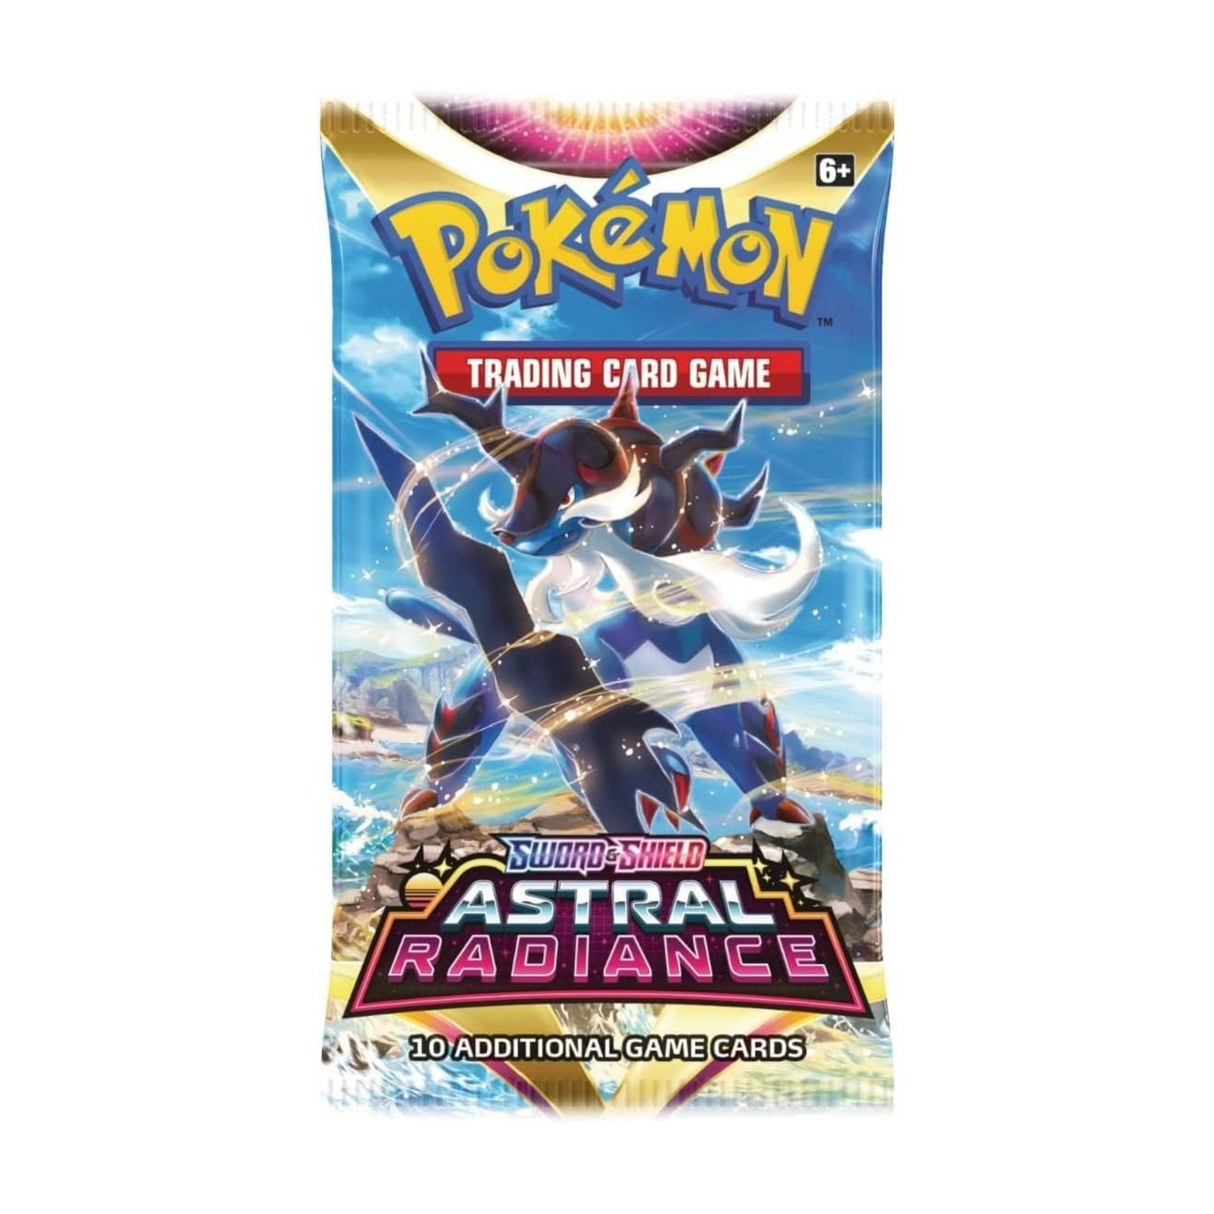 Pokemon TCG Sword & Shield Astral Radiance Sleeved Booster Pack - Assorted